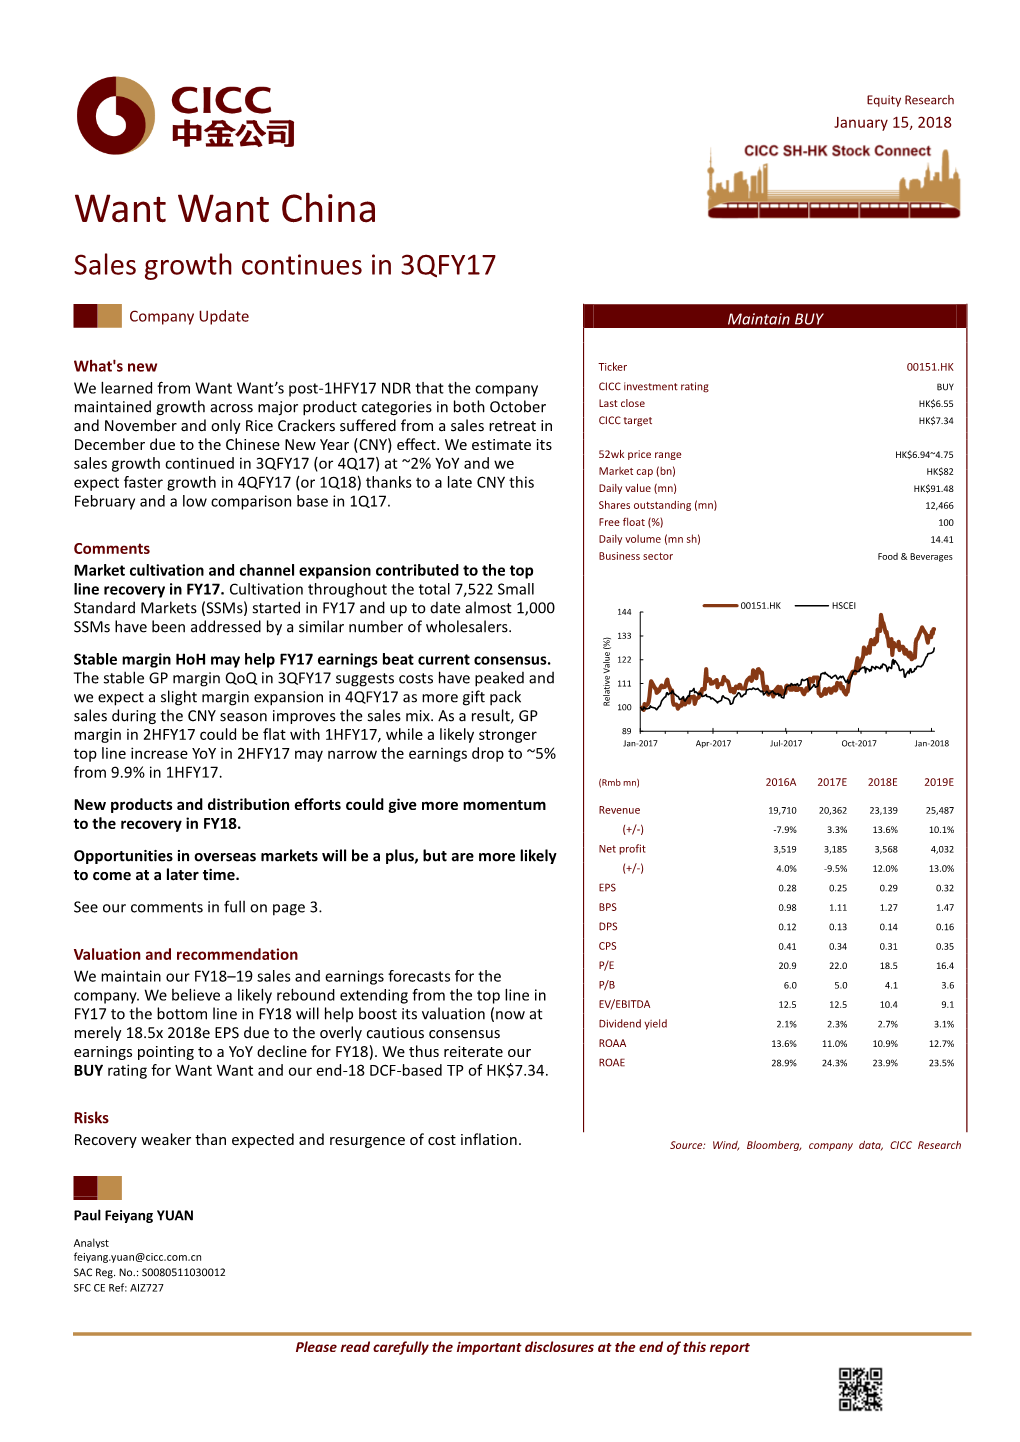 Want Want China Sales Growth Continues in 3QFY17